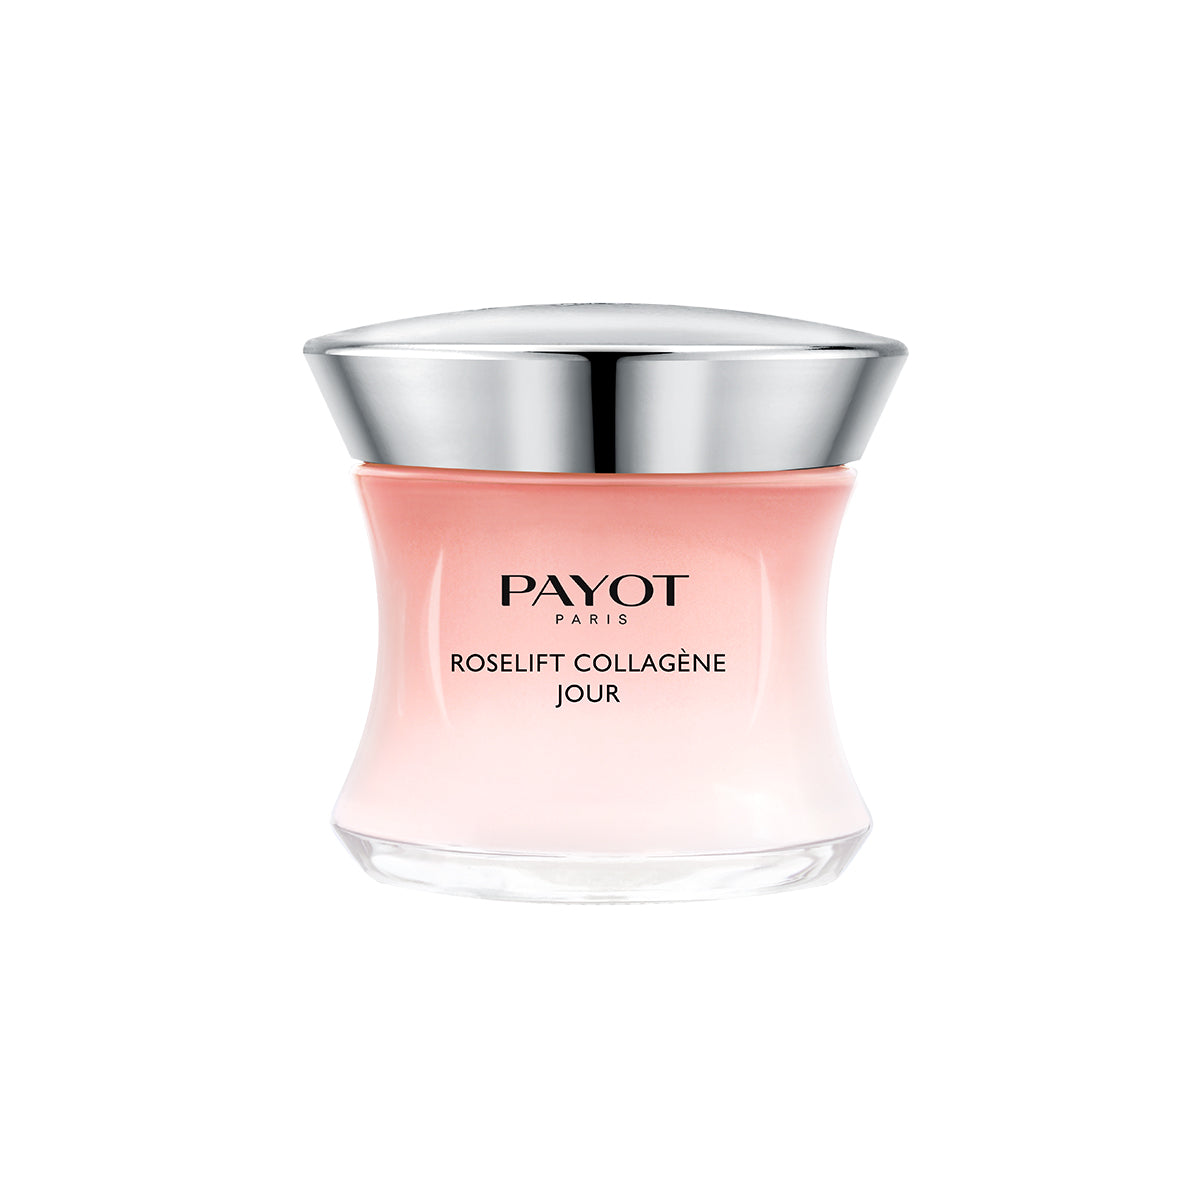 PAYOT Roselift Collagène Jour Day Cream